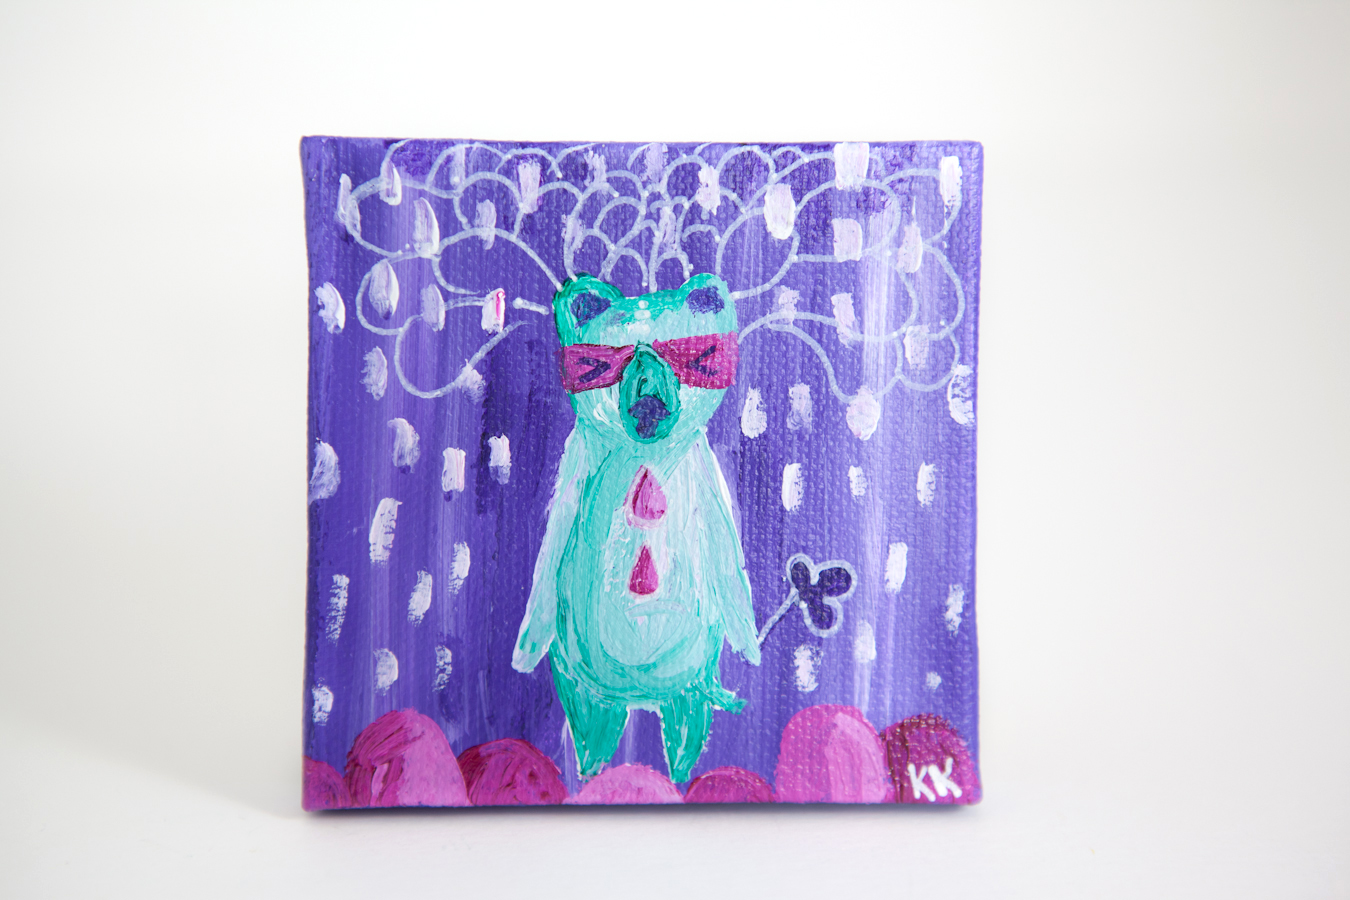 Miniature Painting, Colorful Bear Totem, Whimsical Small Art, Children's Animal Character - Original Mini Painting by Kimberly Kling